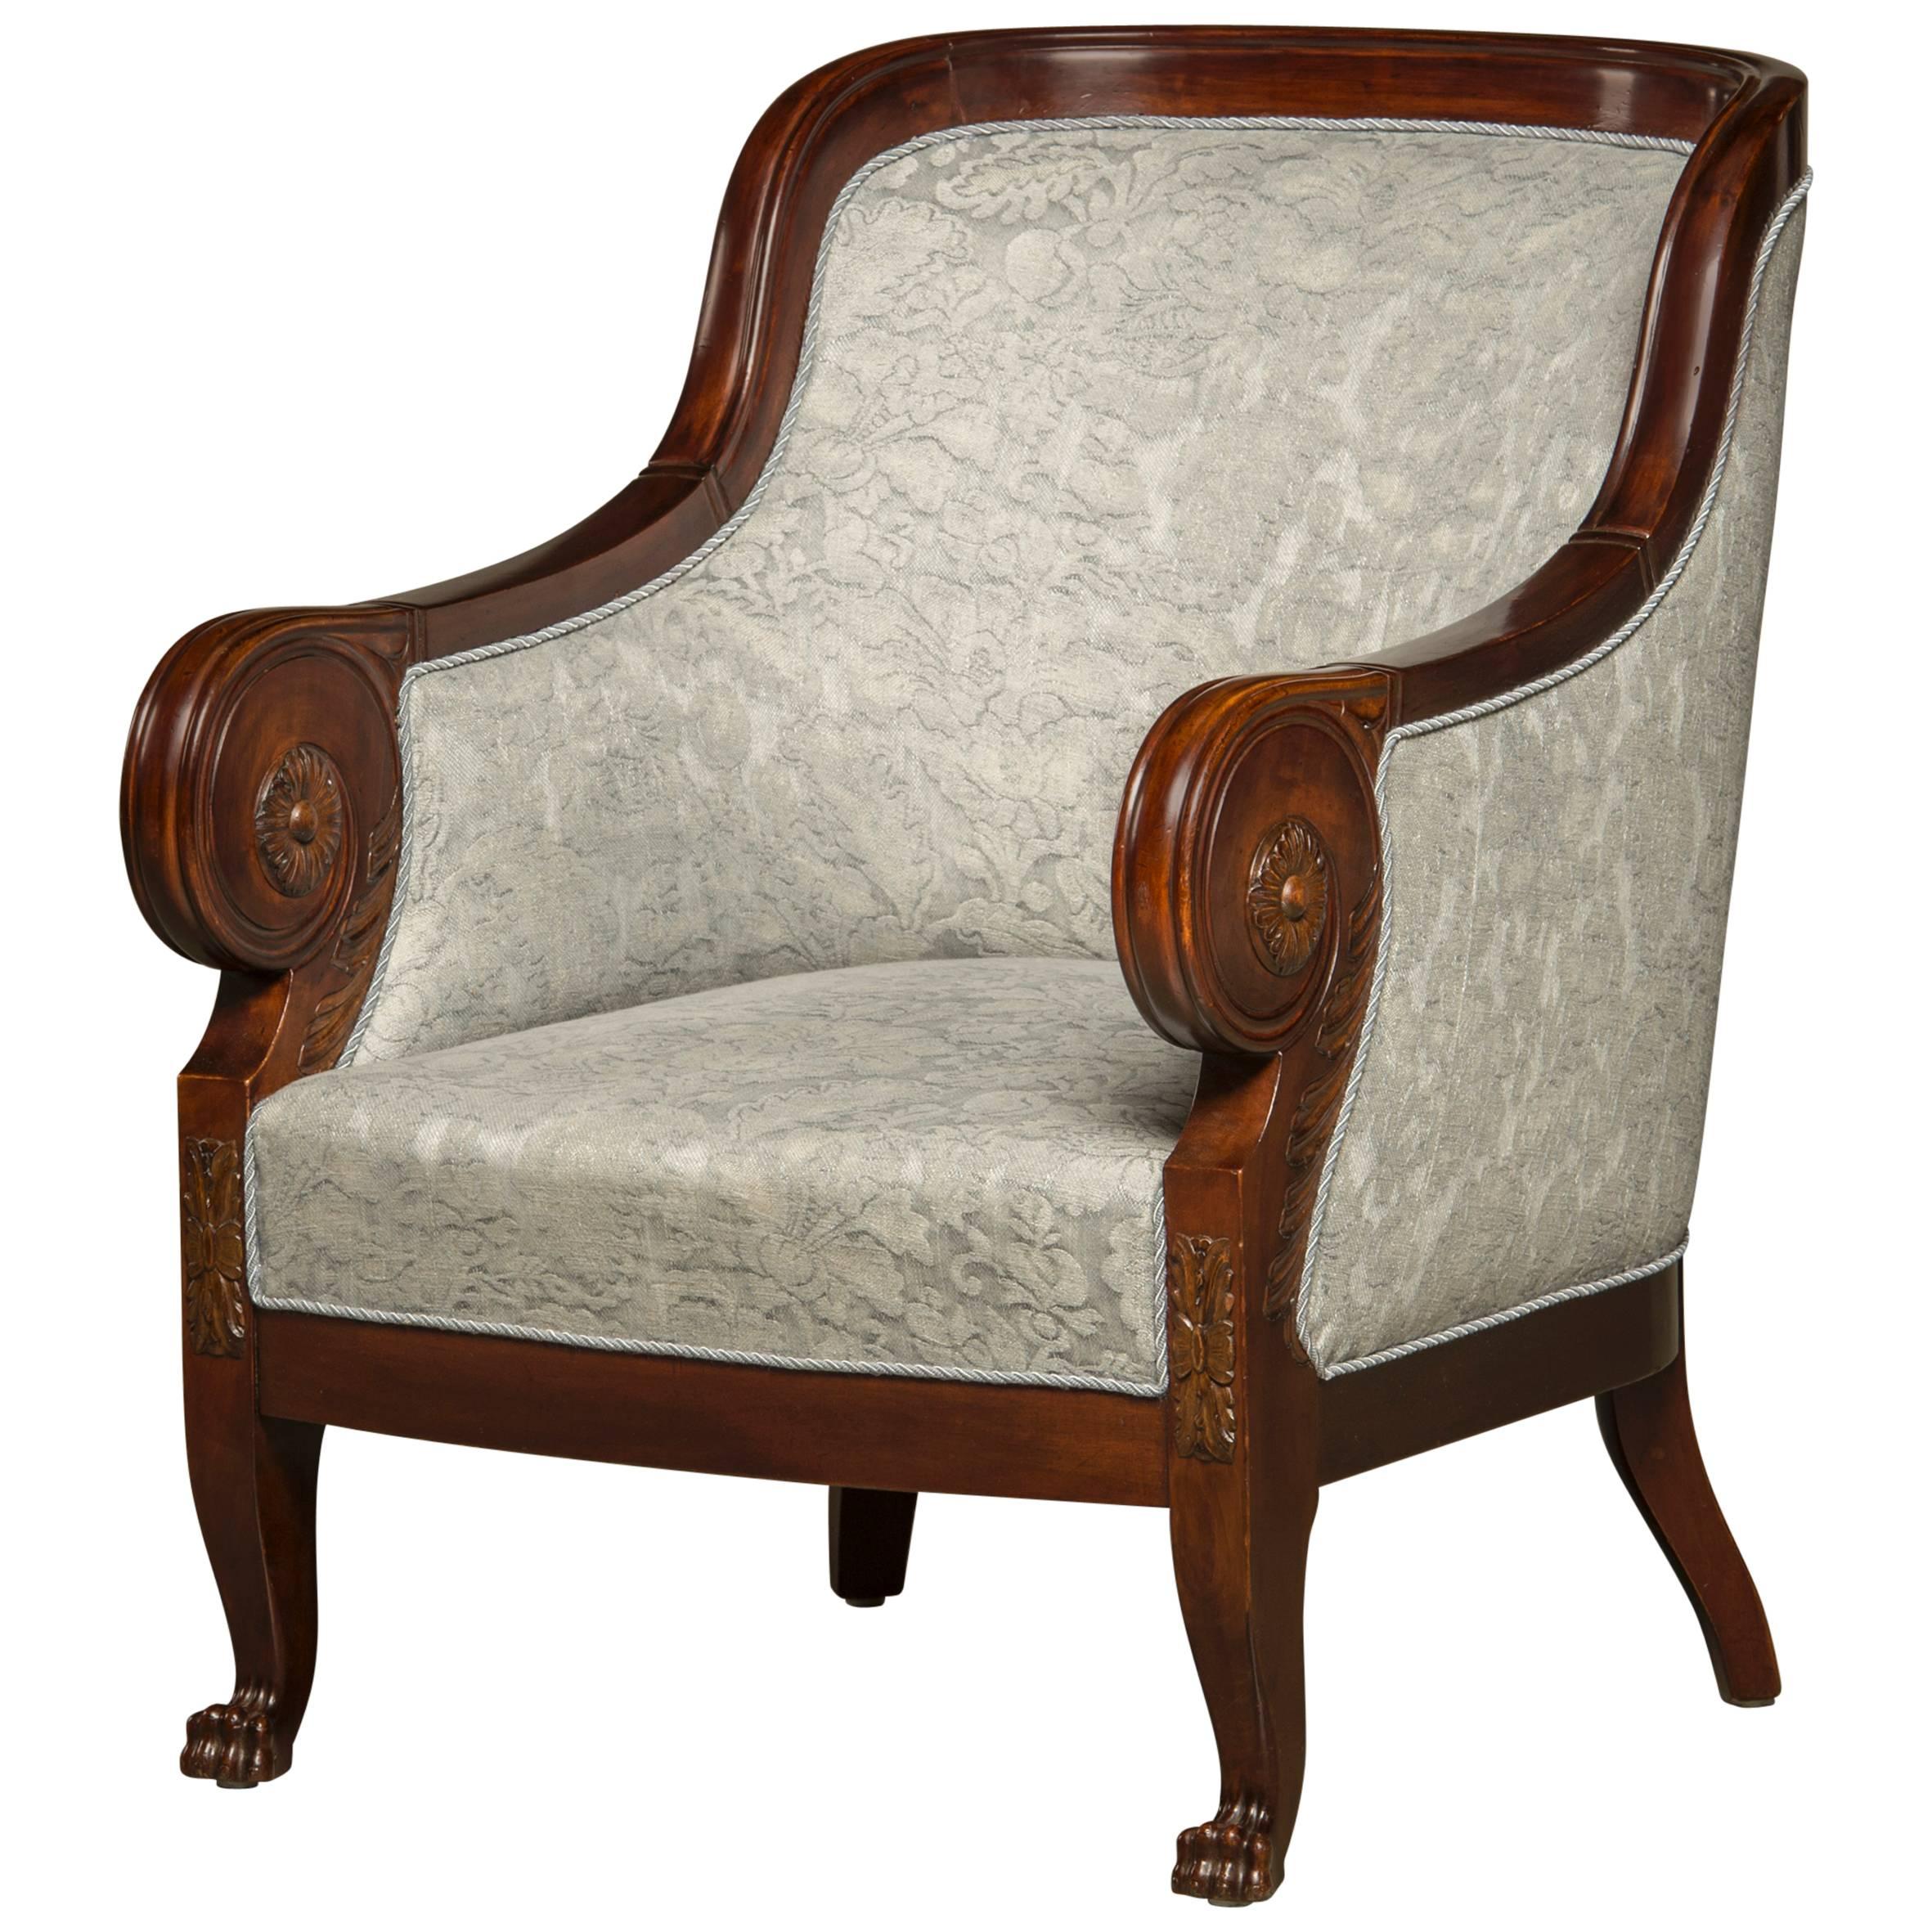 Early 20th Century Reupholstered Art Deco Bergere Chair in Mahogany